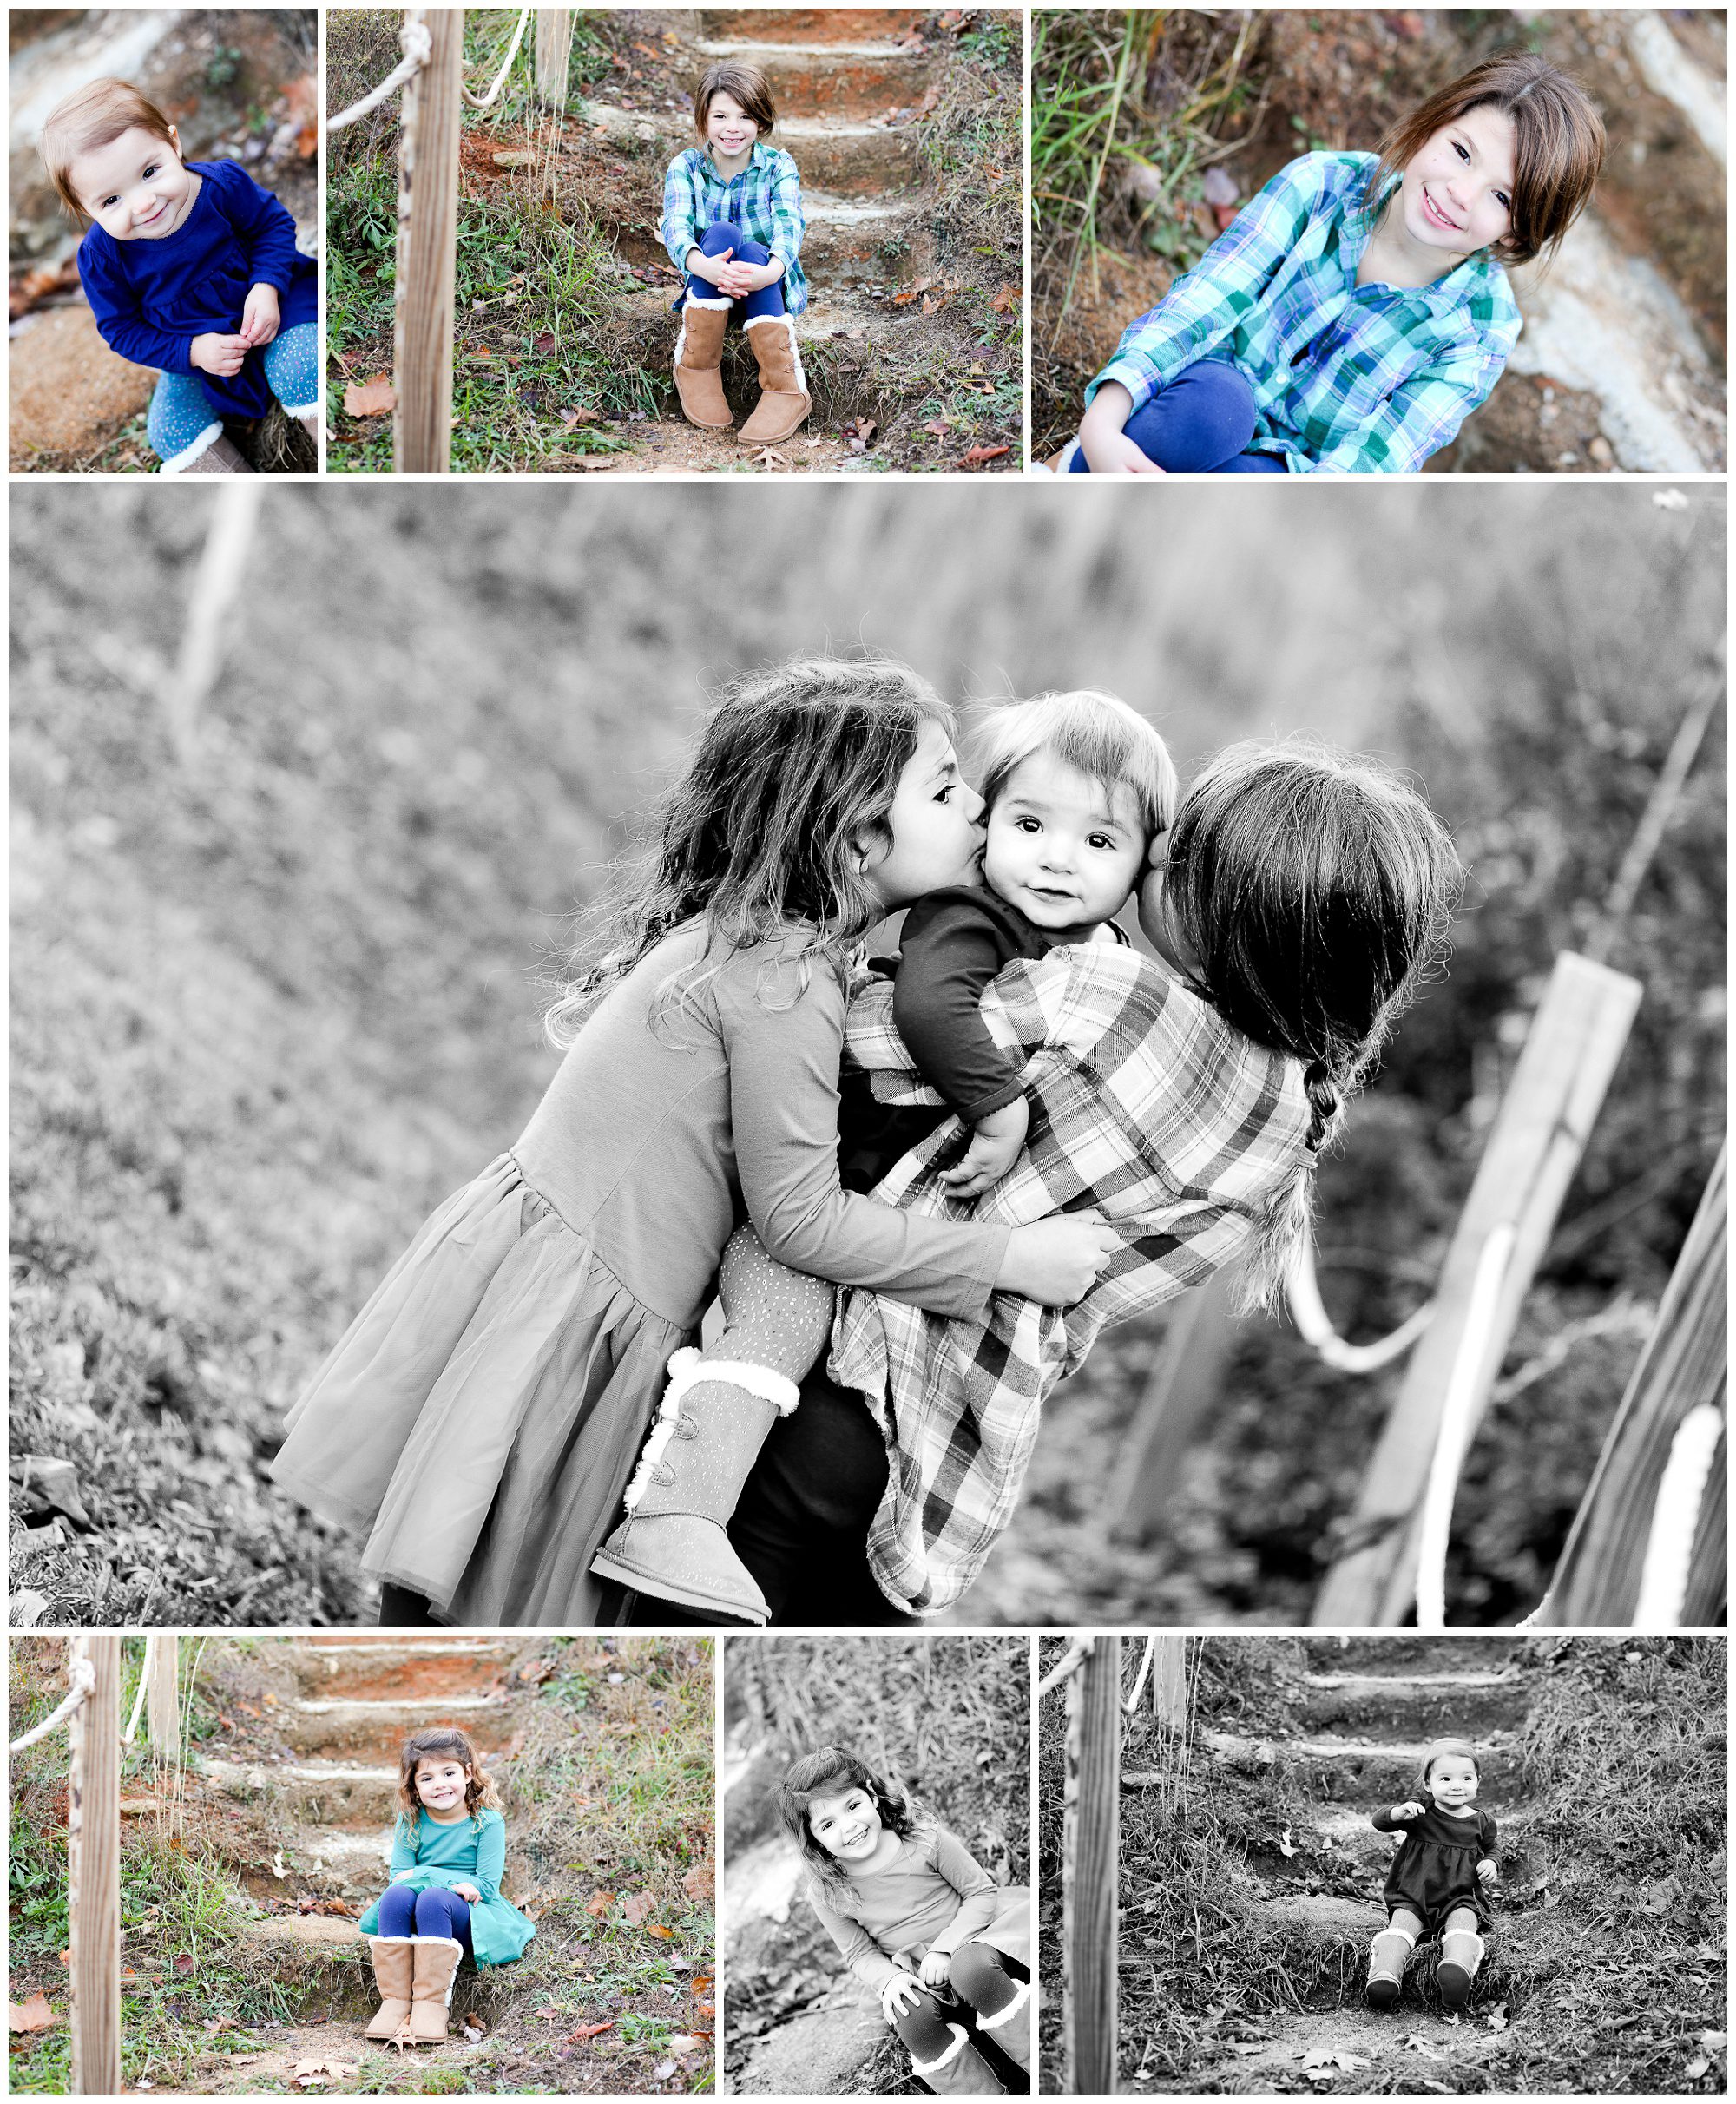 Charlottesville sister portraits albemarle countu central virginia autumn fall sibling love bond hollymead photographer pictures